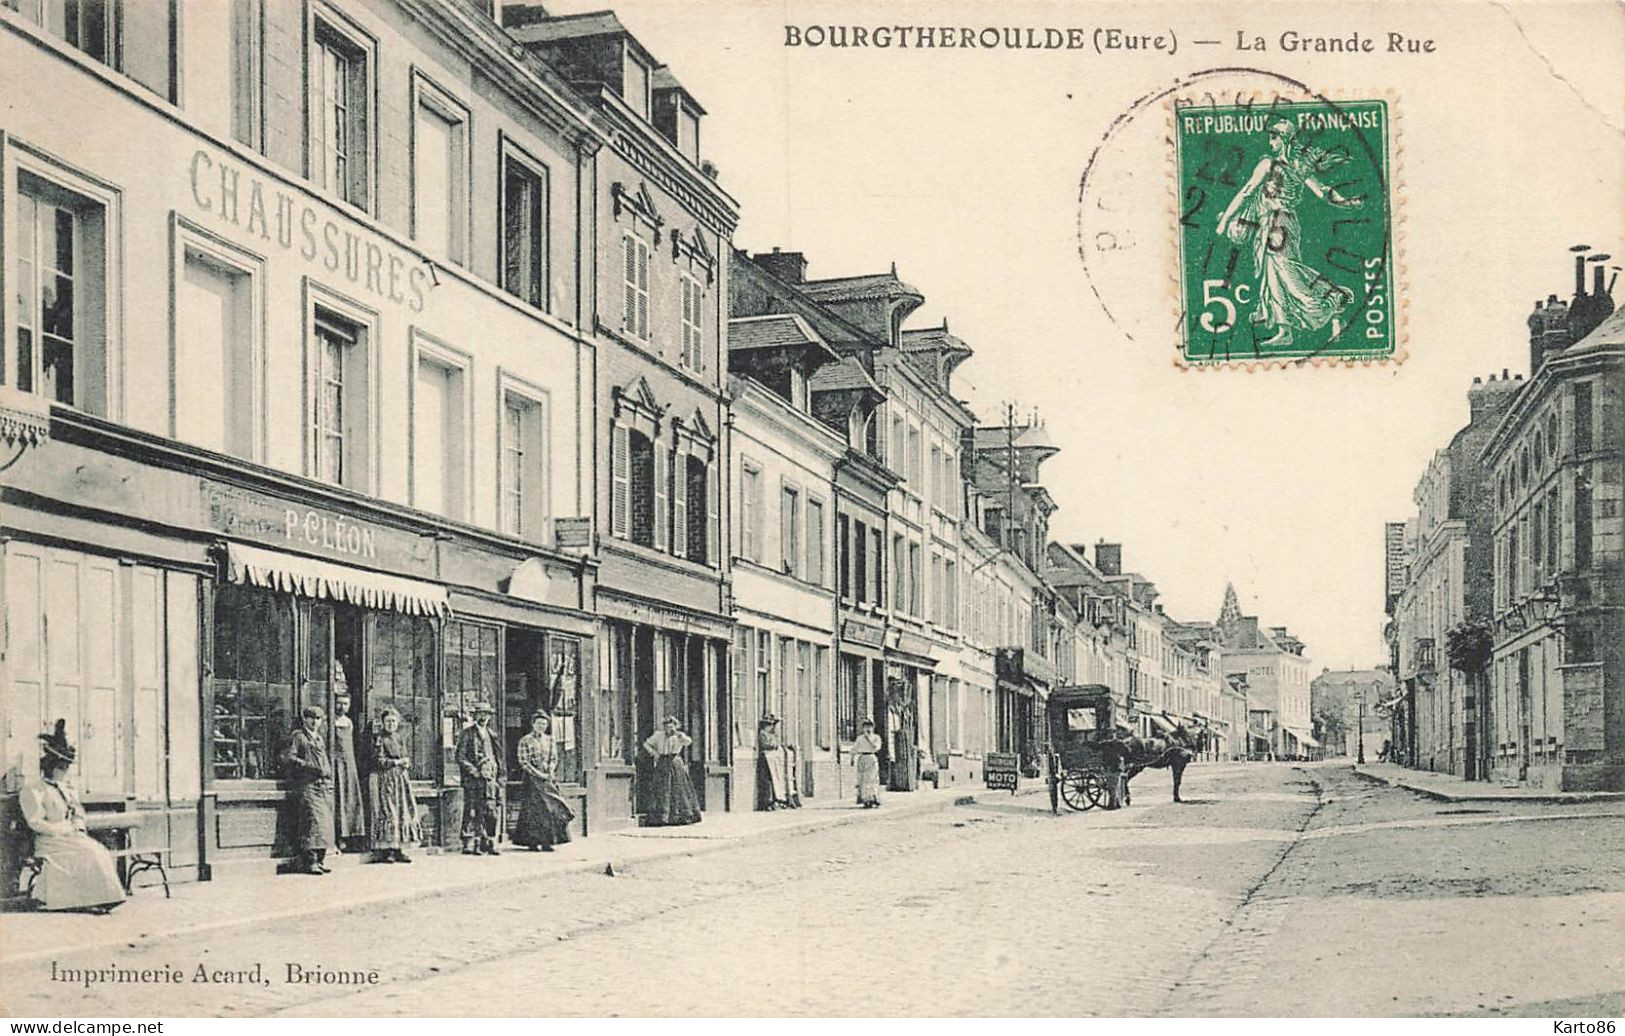 Bourgtheroulde * La Grande Rue * Magasin Commerce Chaussures P. CLEON * Villageois - Bourgtheroulde